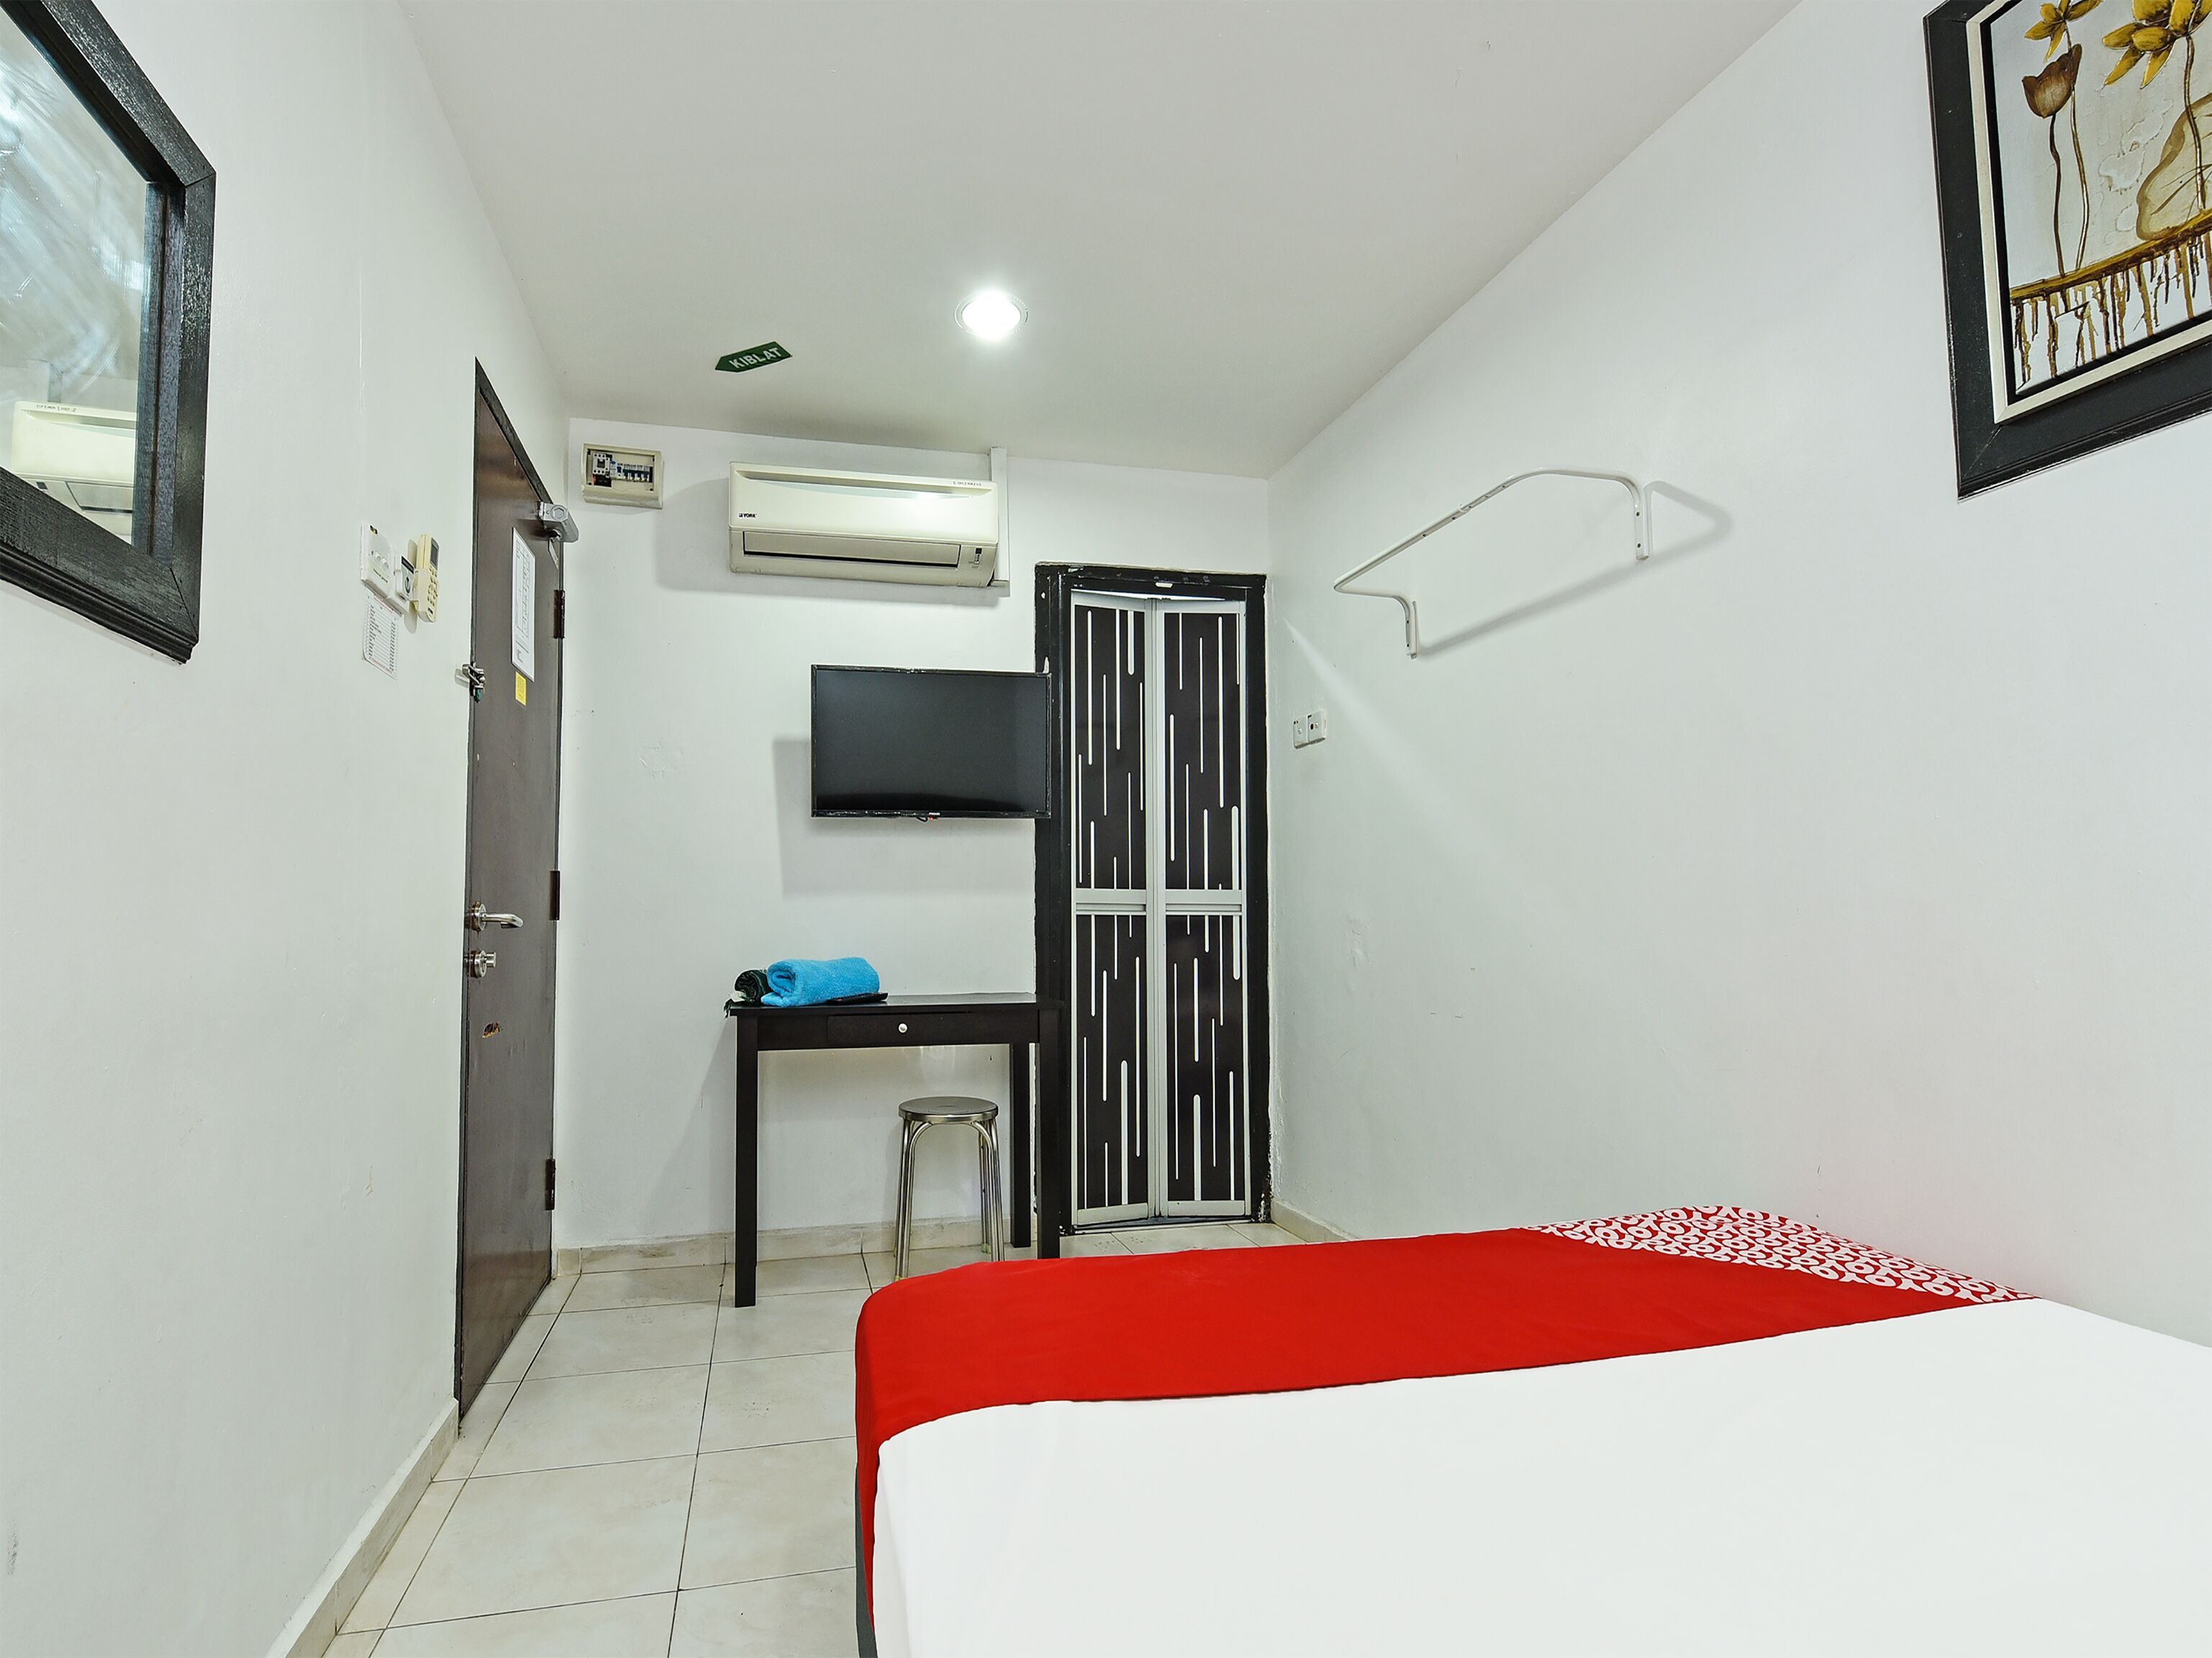 Hotel Gemilang by Oyo Rooms